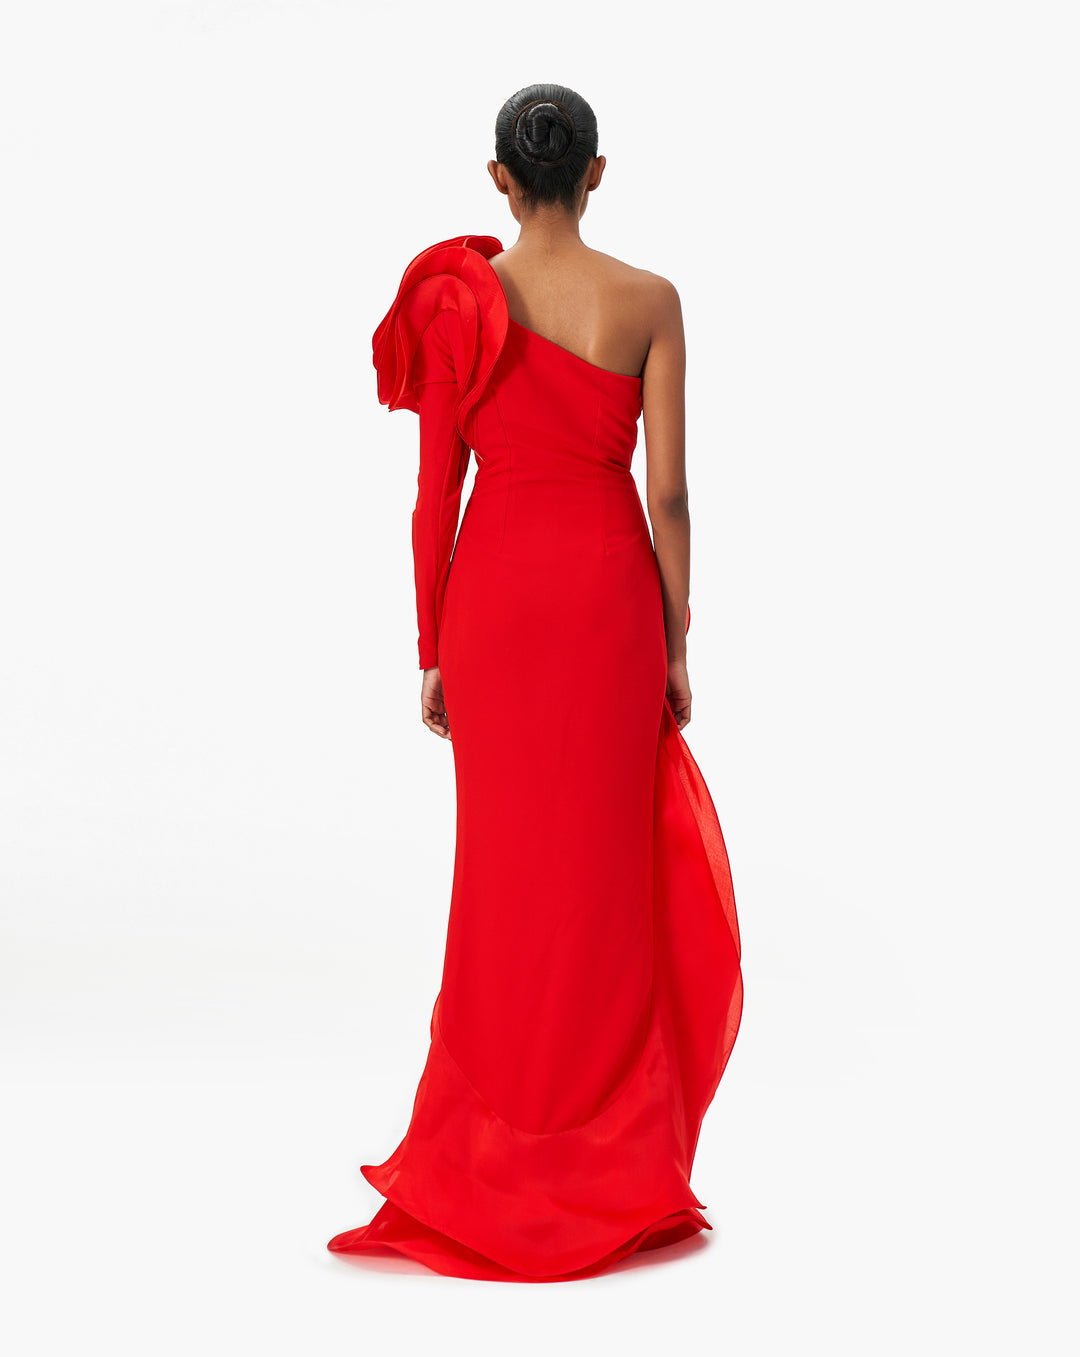 The Ruffled Evening Gown